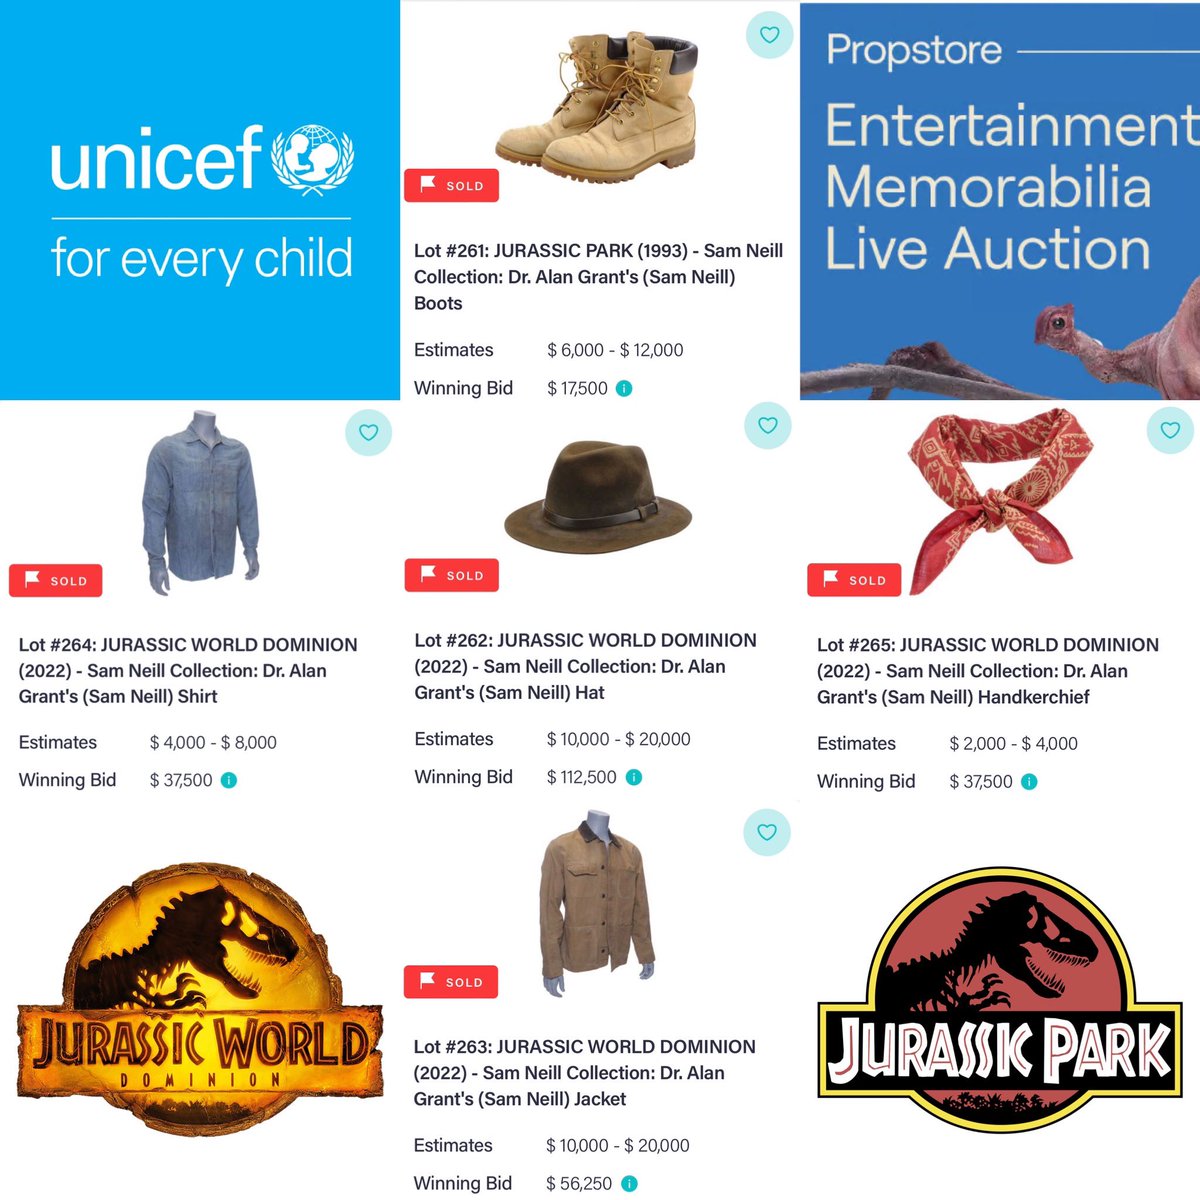 INCREDIBLE JURASSIC RESULT ! The total raised was US$261,000 . I put up my Jurassic odds &ends to benefit refugee children via UNICEF UK. Over a quarter million US dollars ! I could not be more thrilled ! My sincere thanks to the collectors for their great generosity . #jurassic